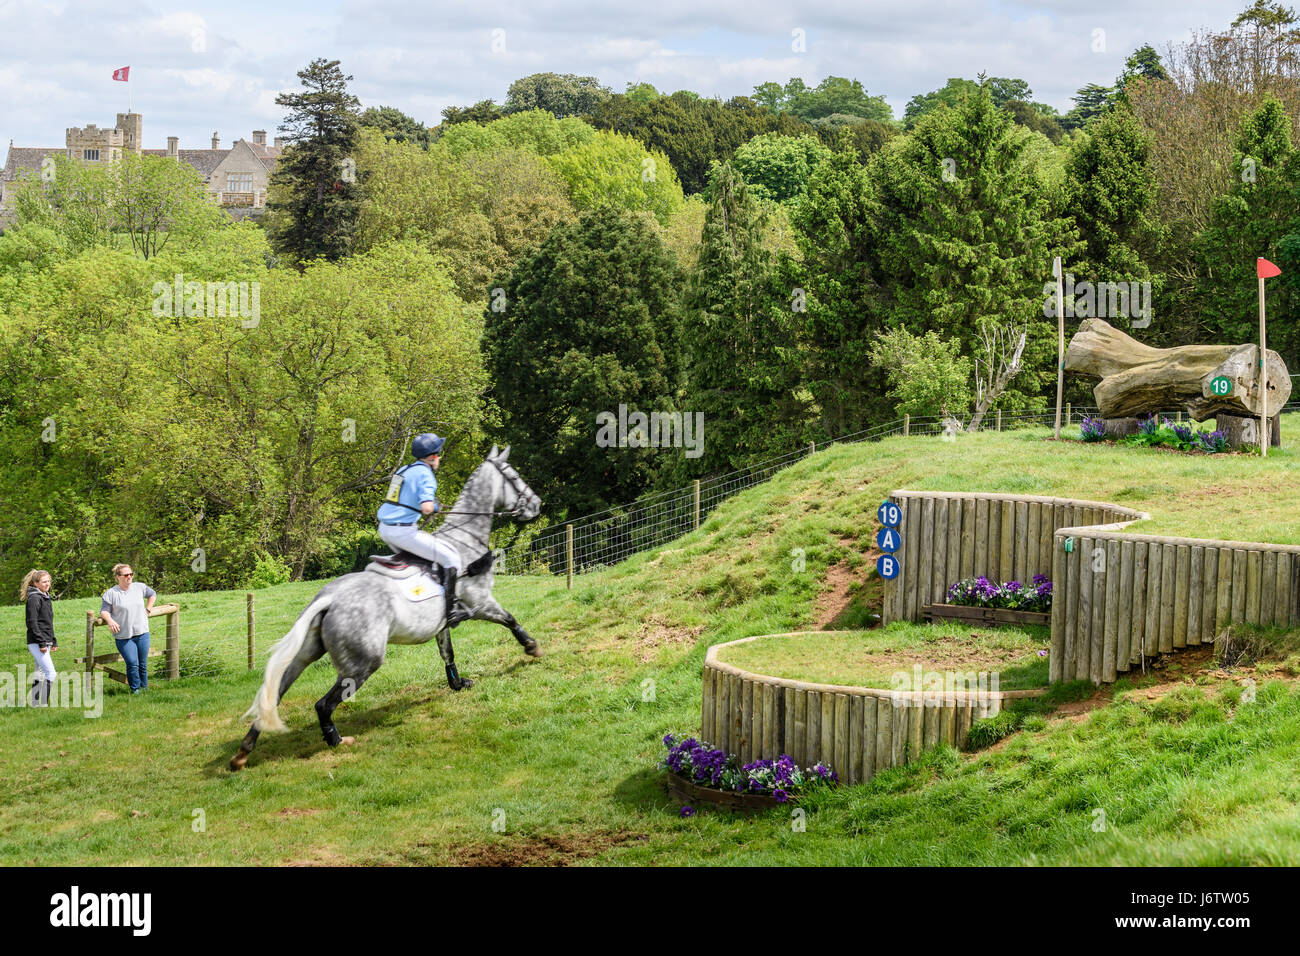 Rockingham Castle, Corby, UK. 21st May, 2017. James Rushbrooke and his horse Rowland run uphill towards a log obstacle with Rockingham castle in the background on a sunny day during the cross country phase of the Rockingham International Horse Trials in the grounds of the Norman castle at Rockingham, Corby, England on 21st May 2017. Credit: miscellany/Alamy Live News Stock Photo